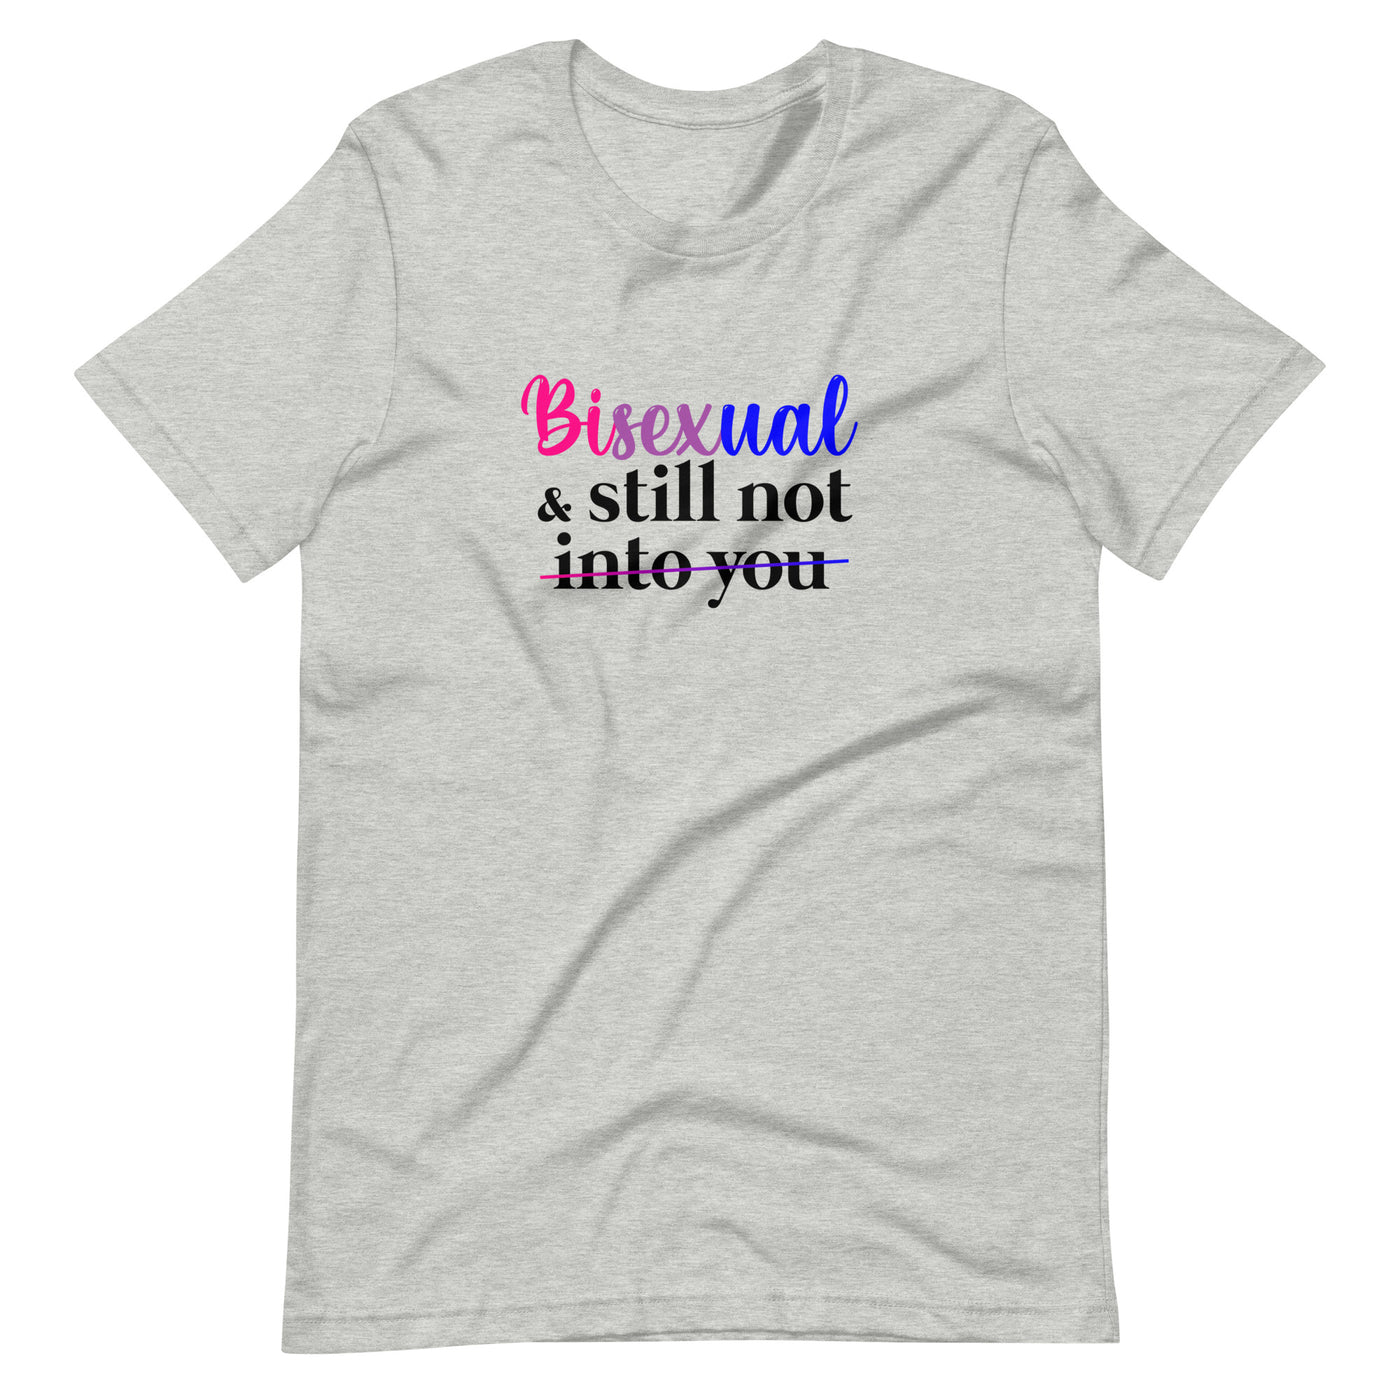 Pride Clothes - Not-So-Gentle Bisexual & Still Not into You TShirt - Athletic Heather